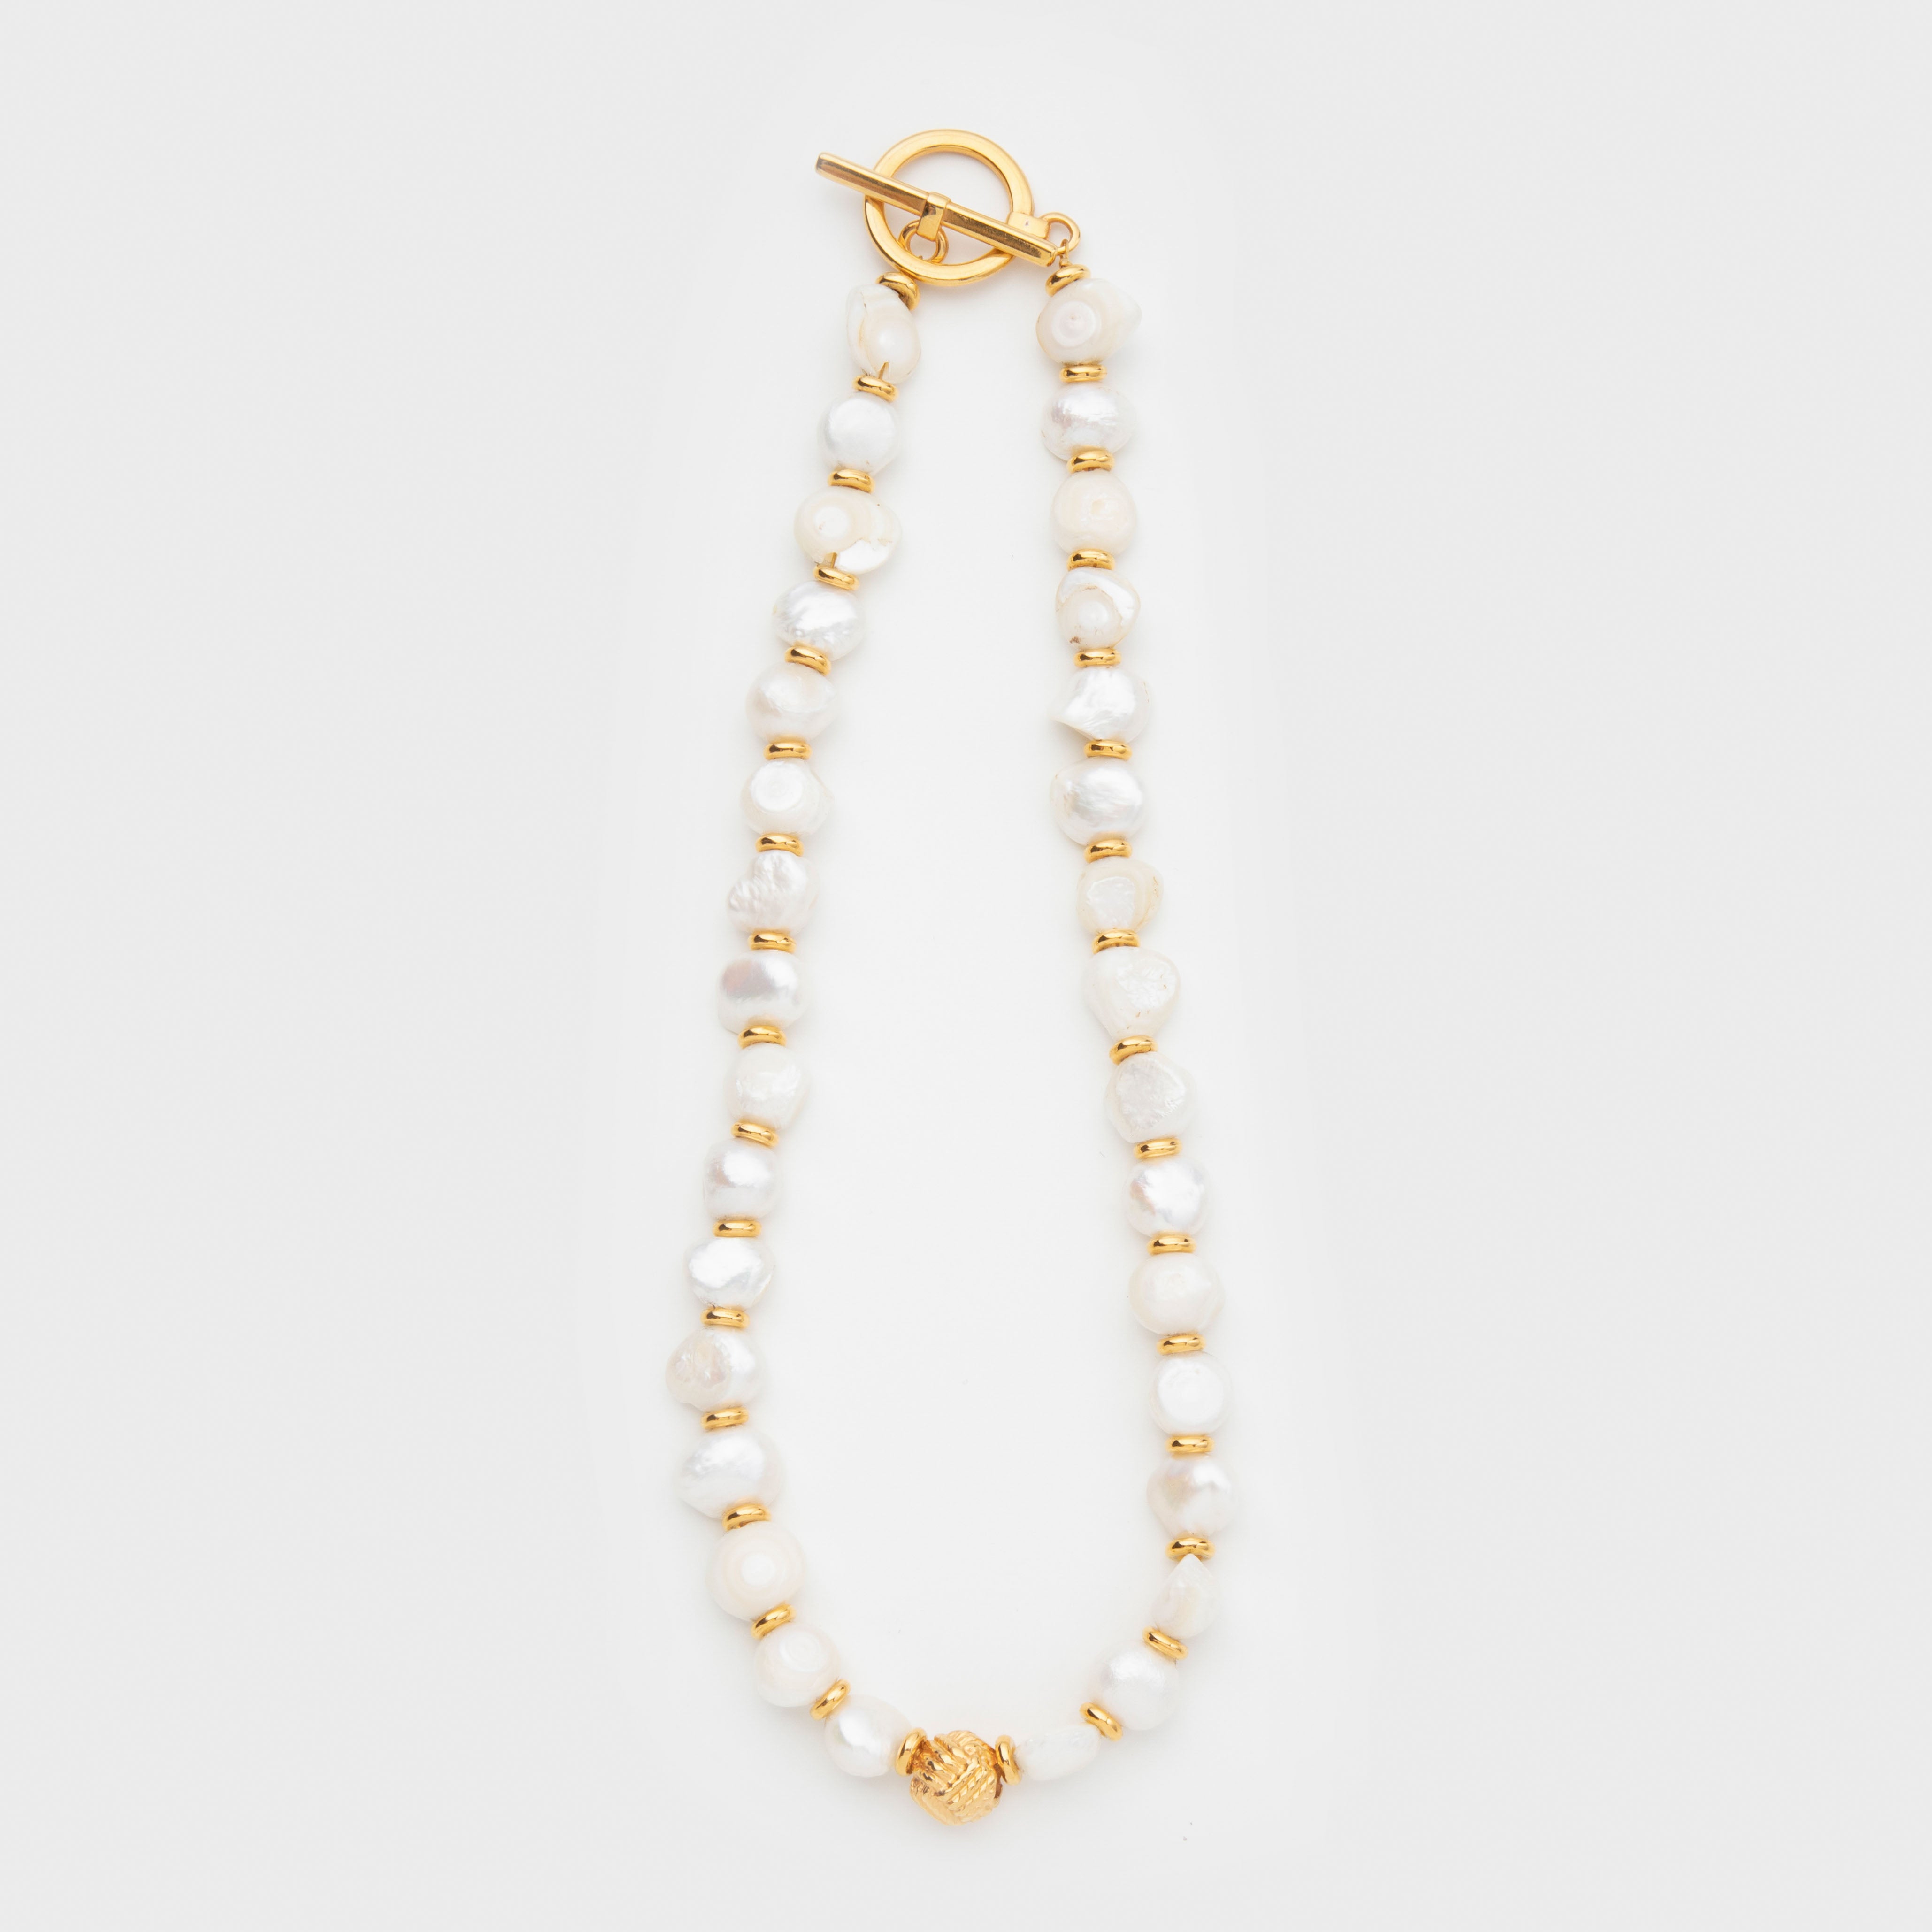 San Marino Necklace by Pearl Martini